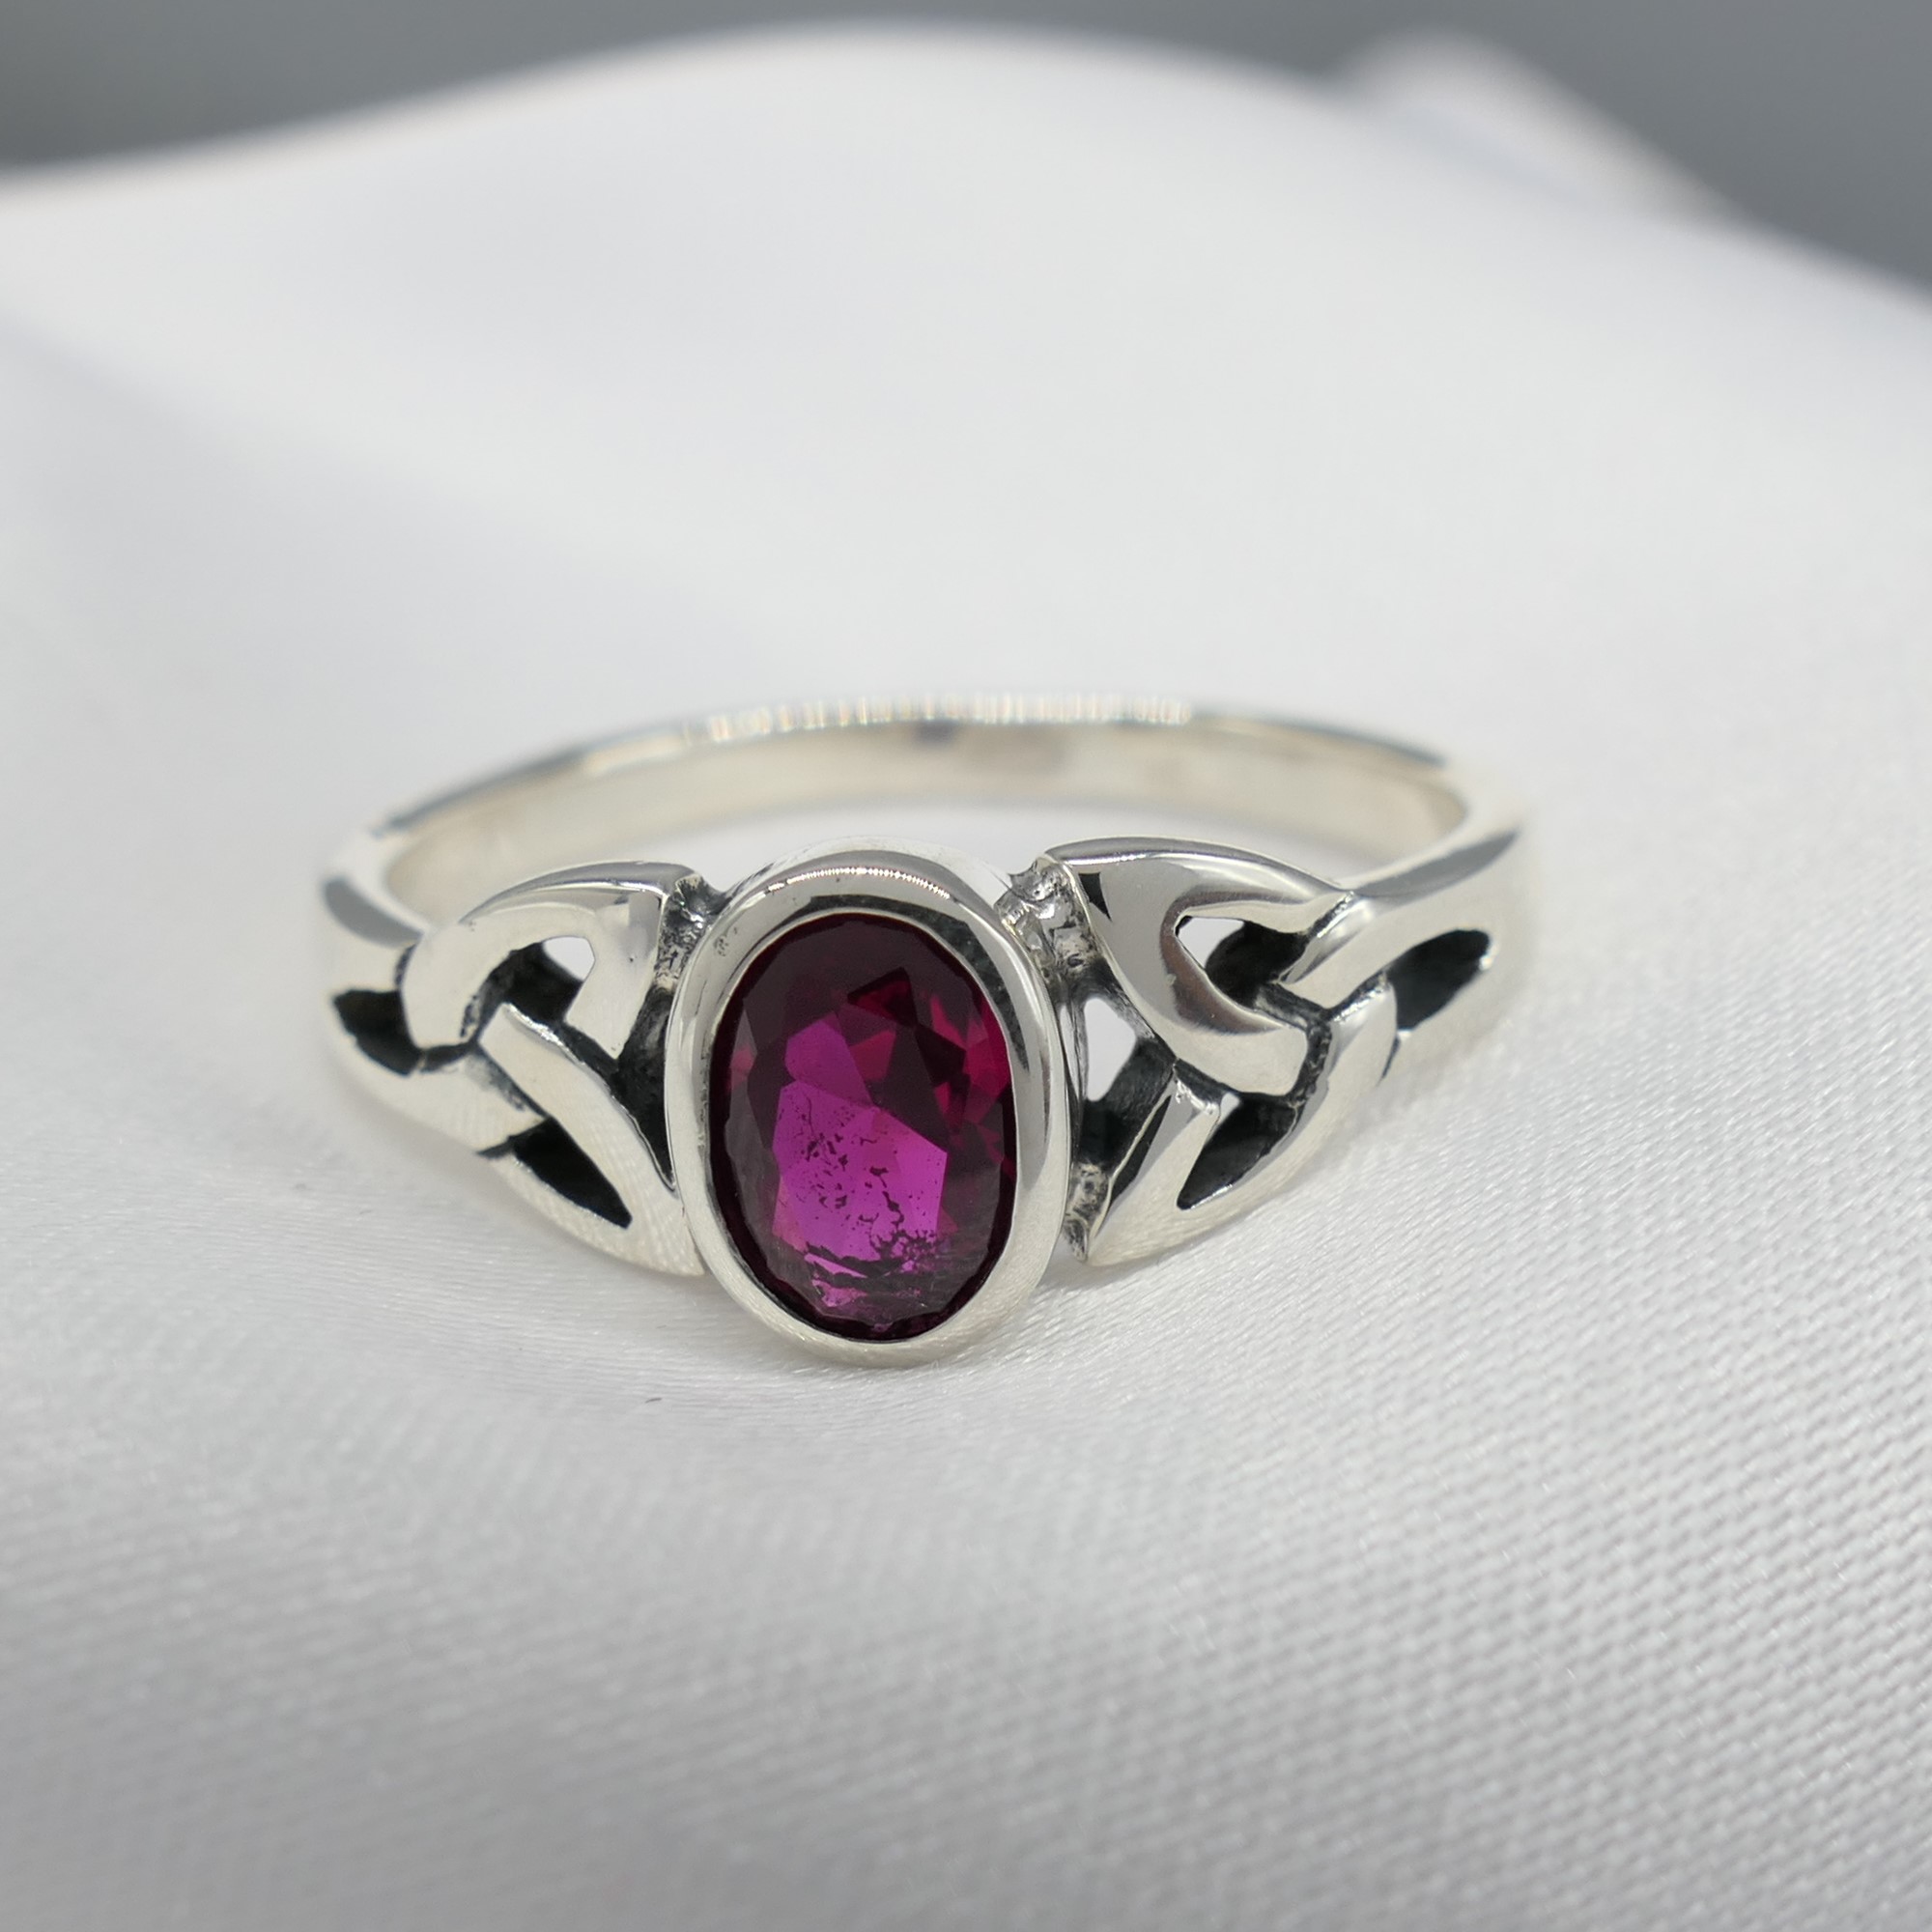 Sterling Silver Celtic-Style Dress Ring Set With An Oval Magenta Cubic Zirconia - Image 5 of 5